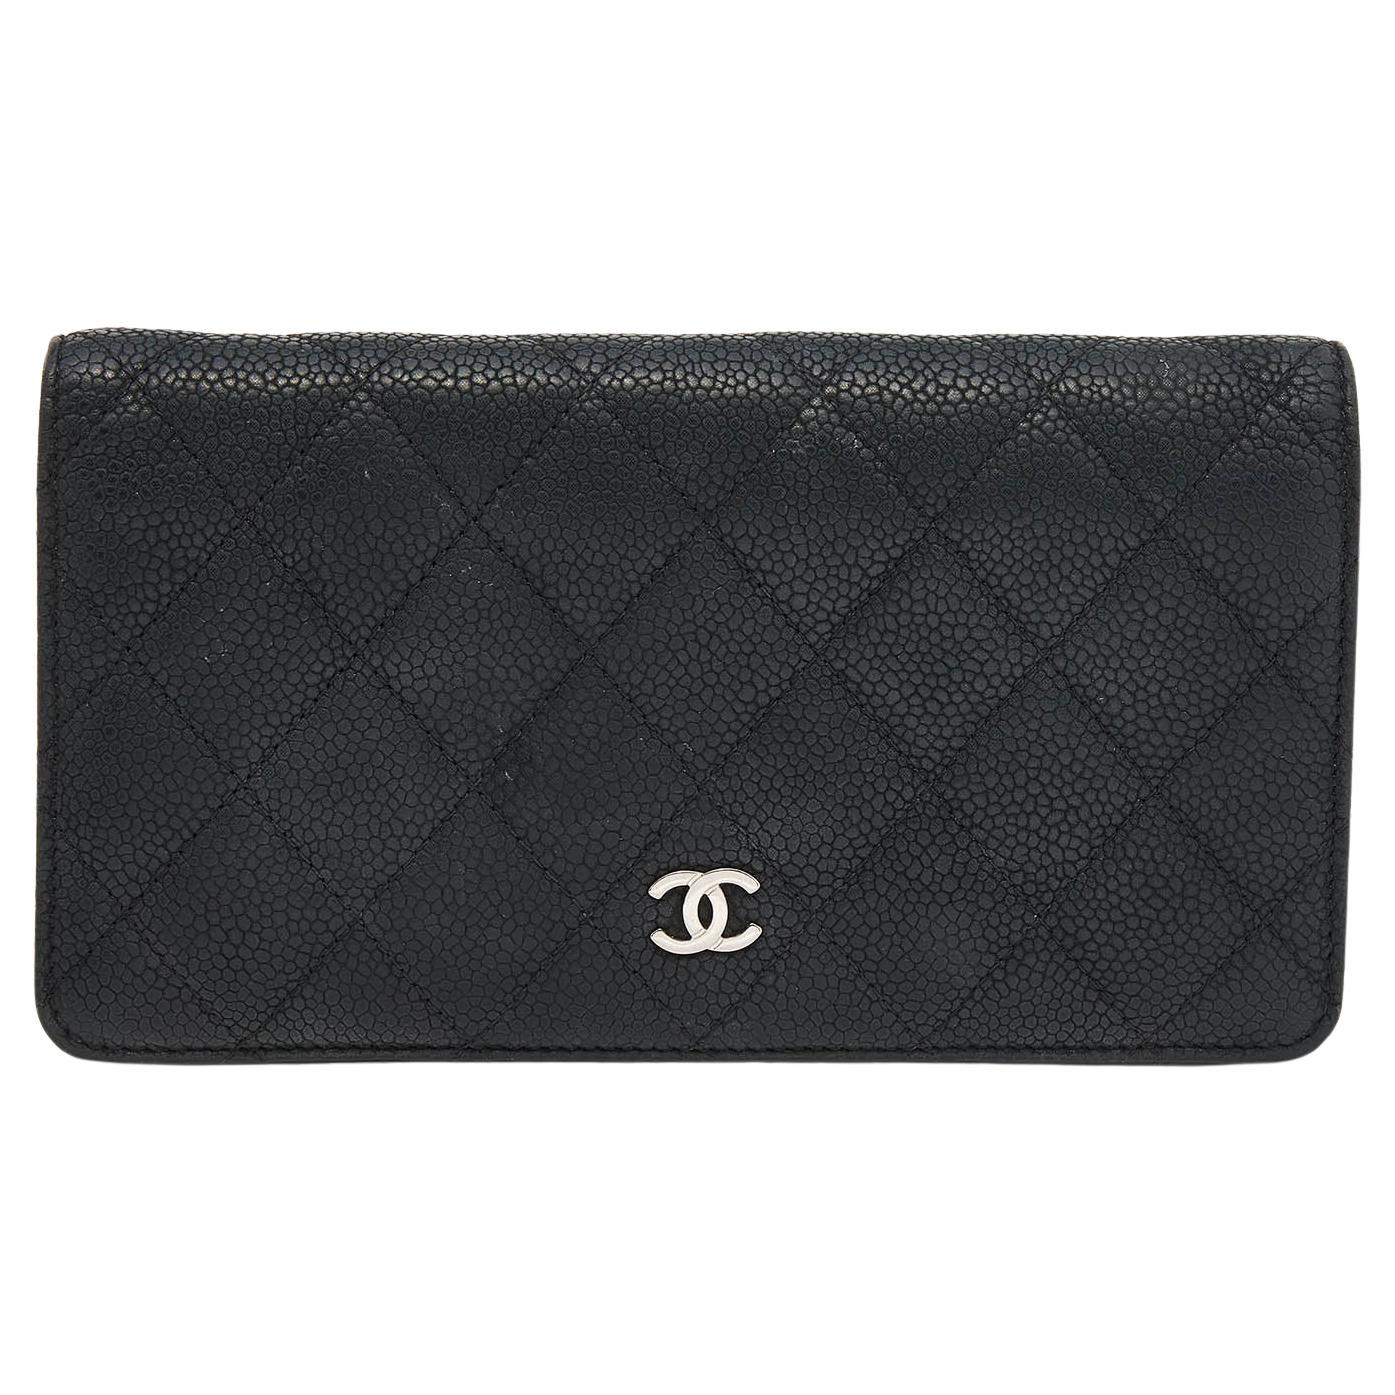 Chanel Black Quilted Caviar Leather Yen Continental Wallet